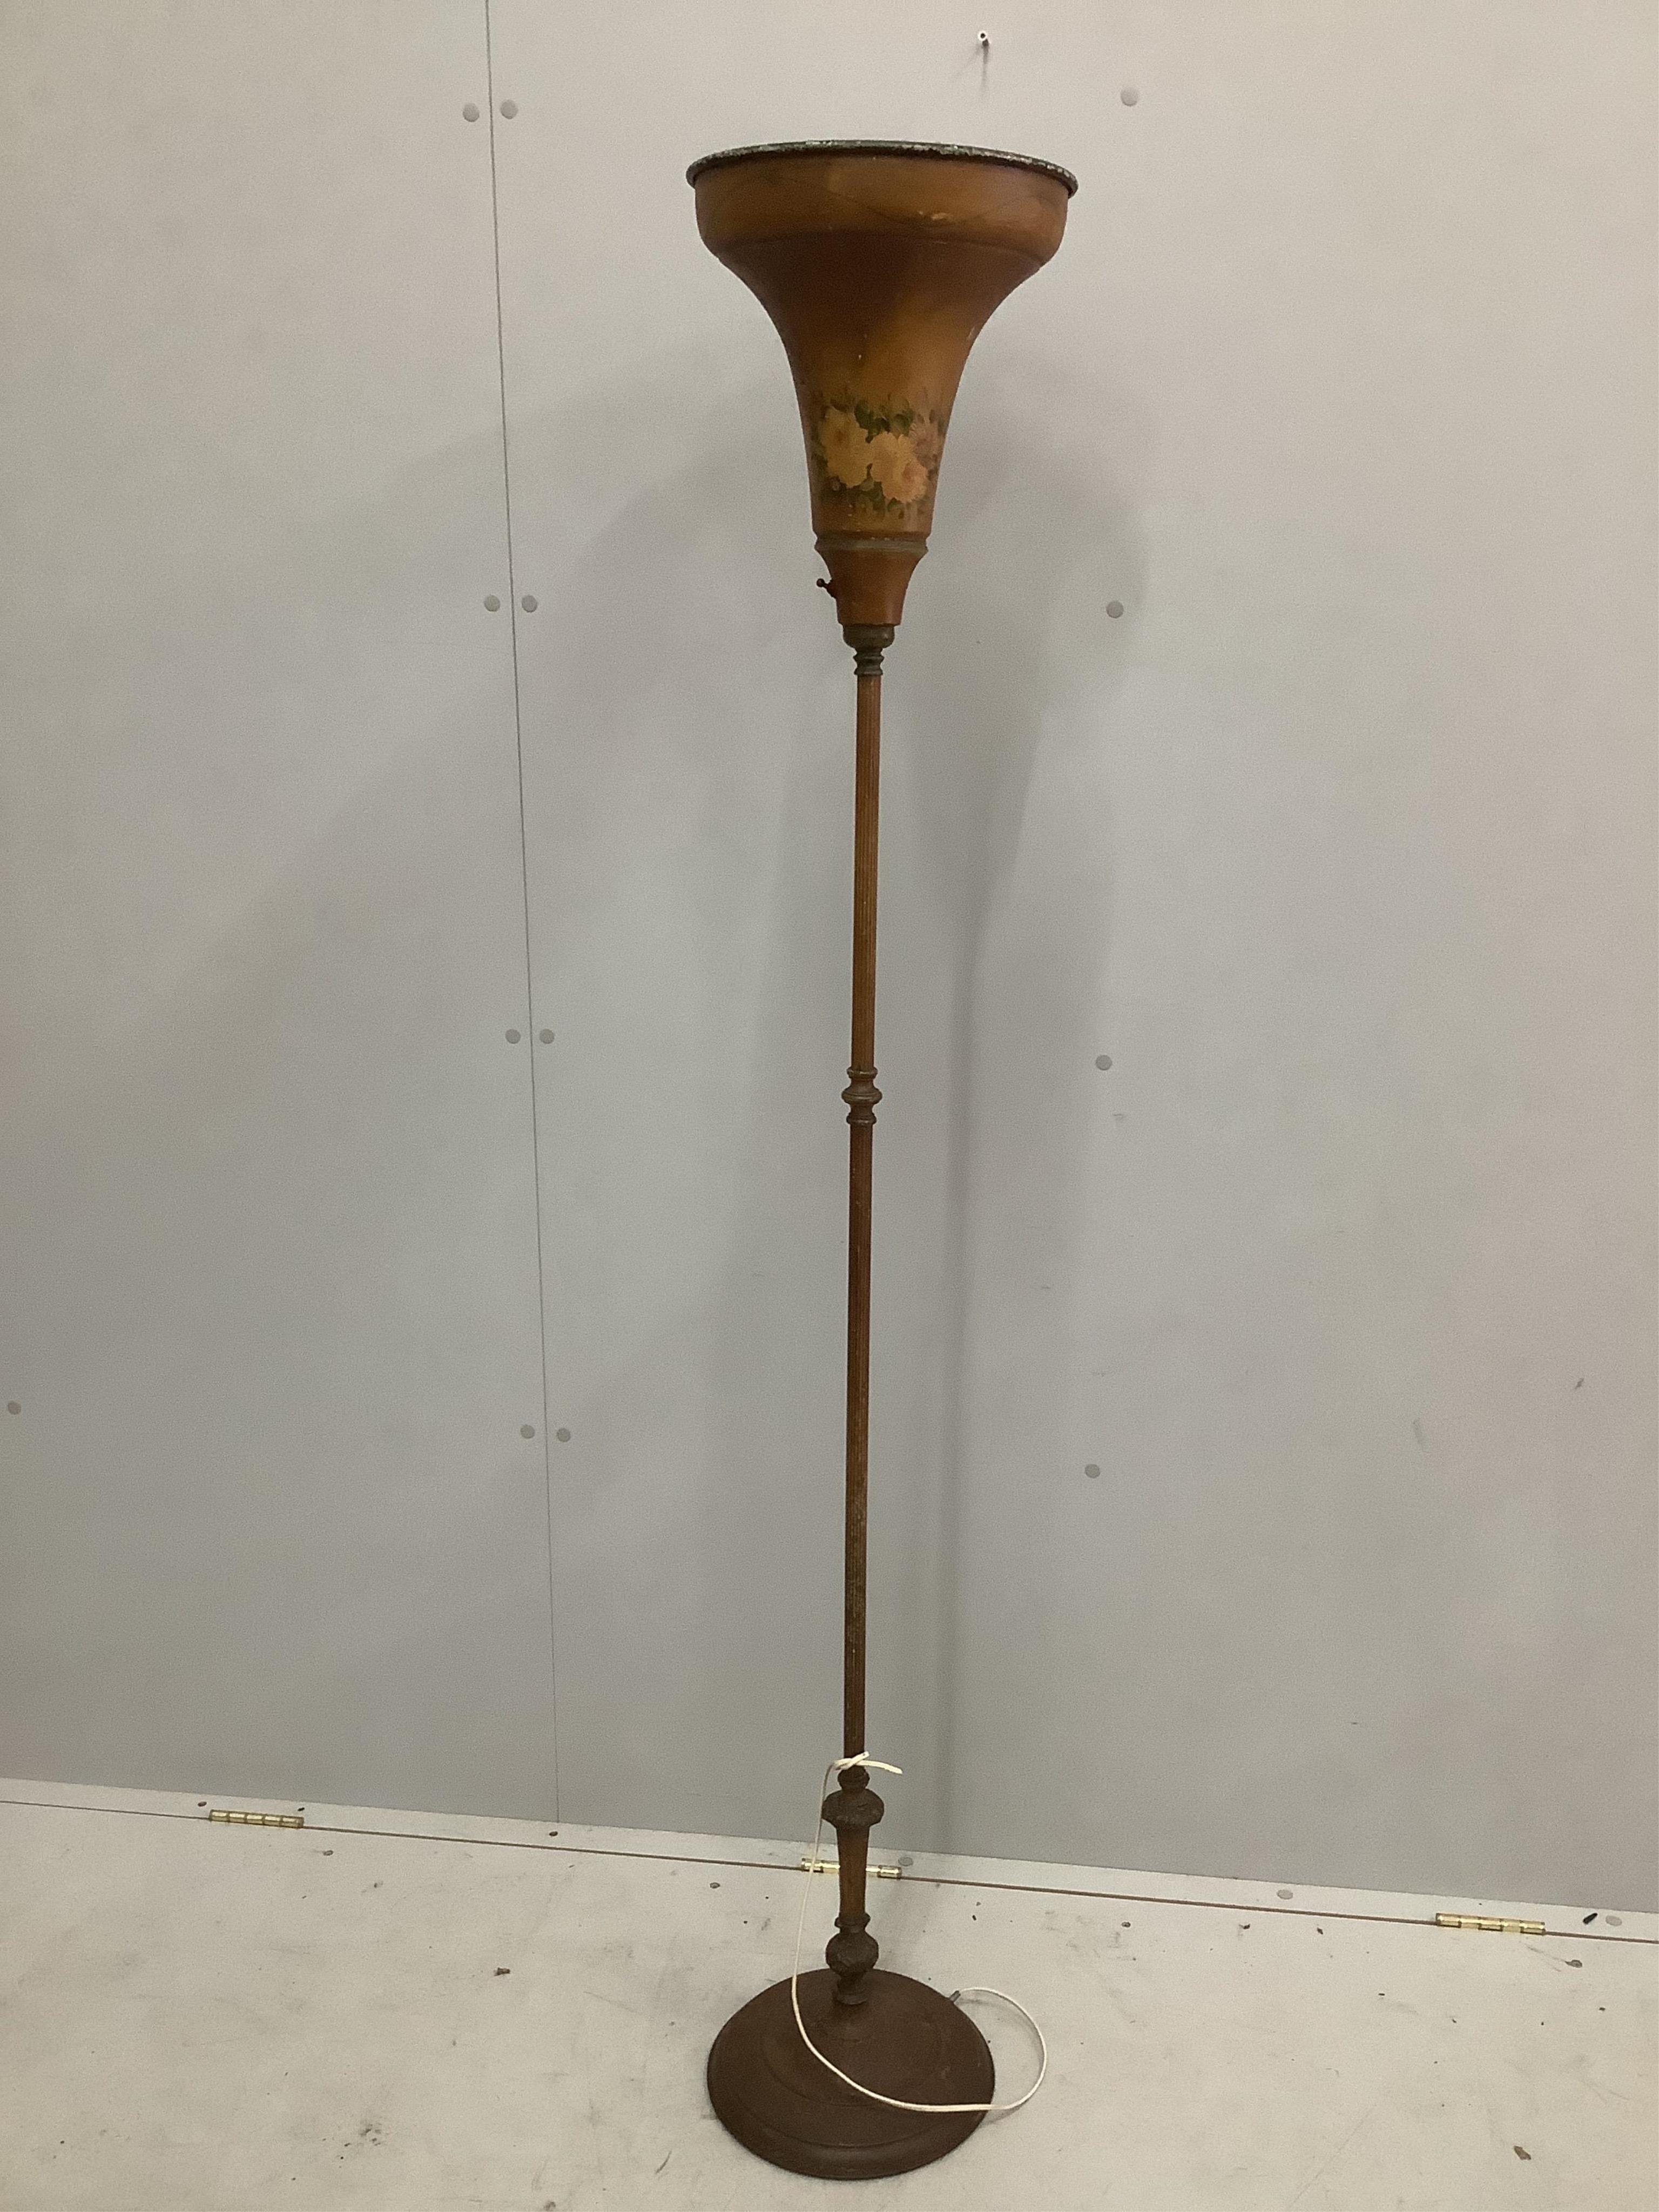 A toleware uplighter, height 164cm. Condition - fair